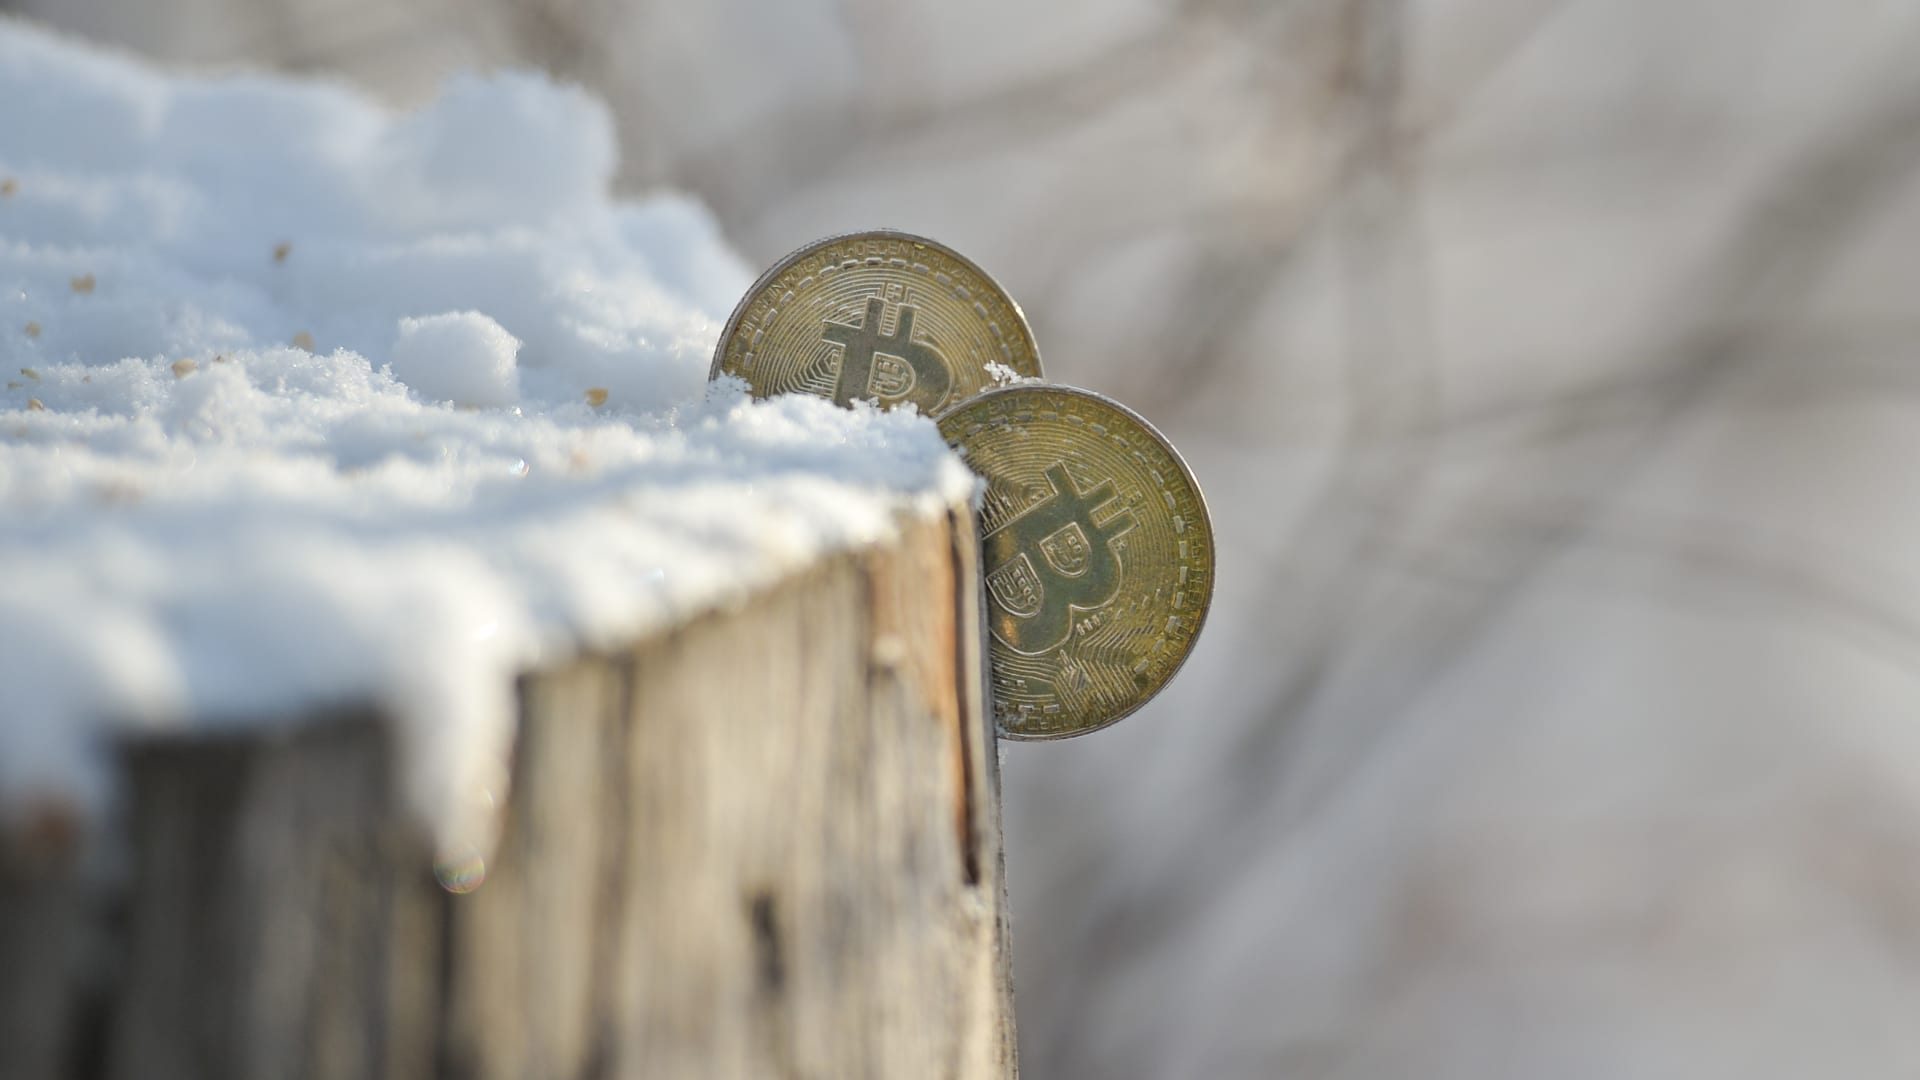 Bitcoin has crashed 68% from its peak â but one bull says the latest crypto winter is a ‘warm winter’